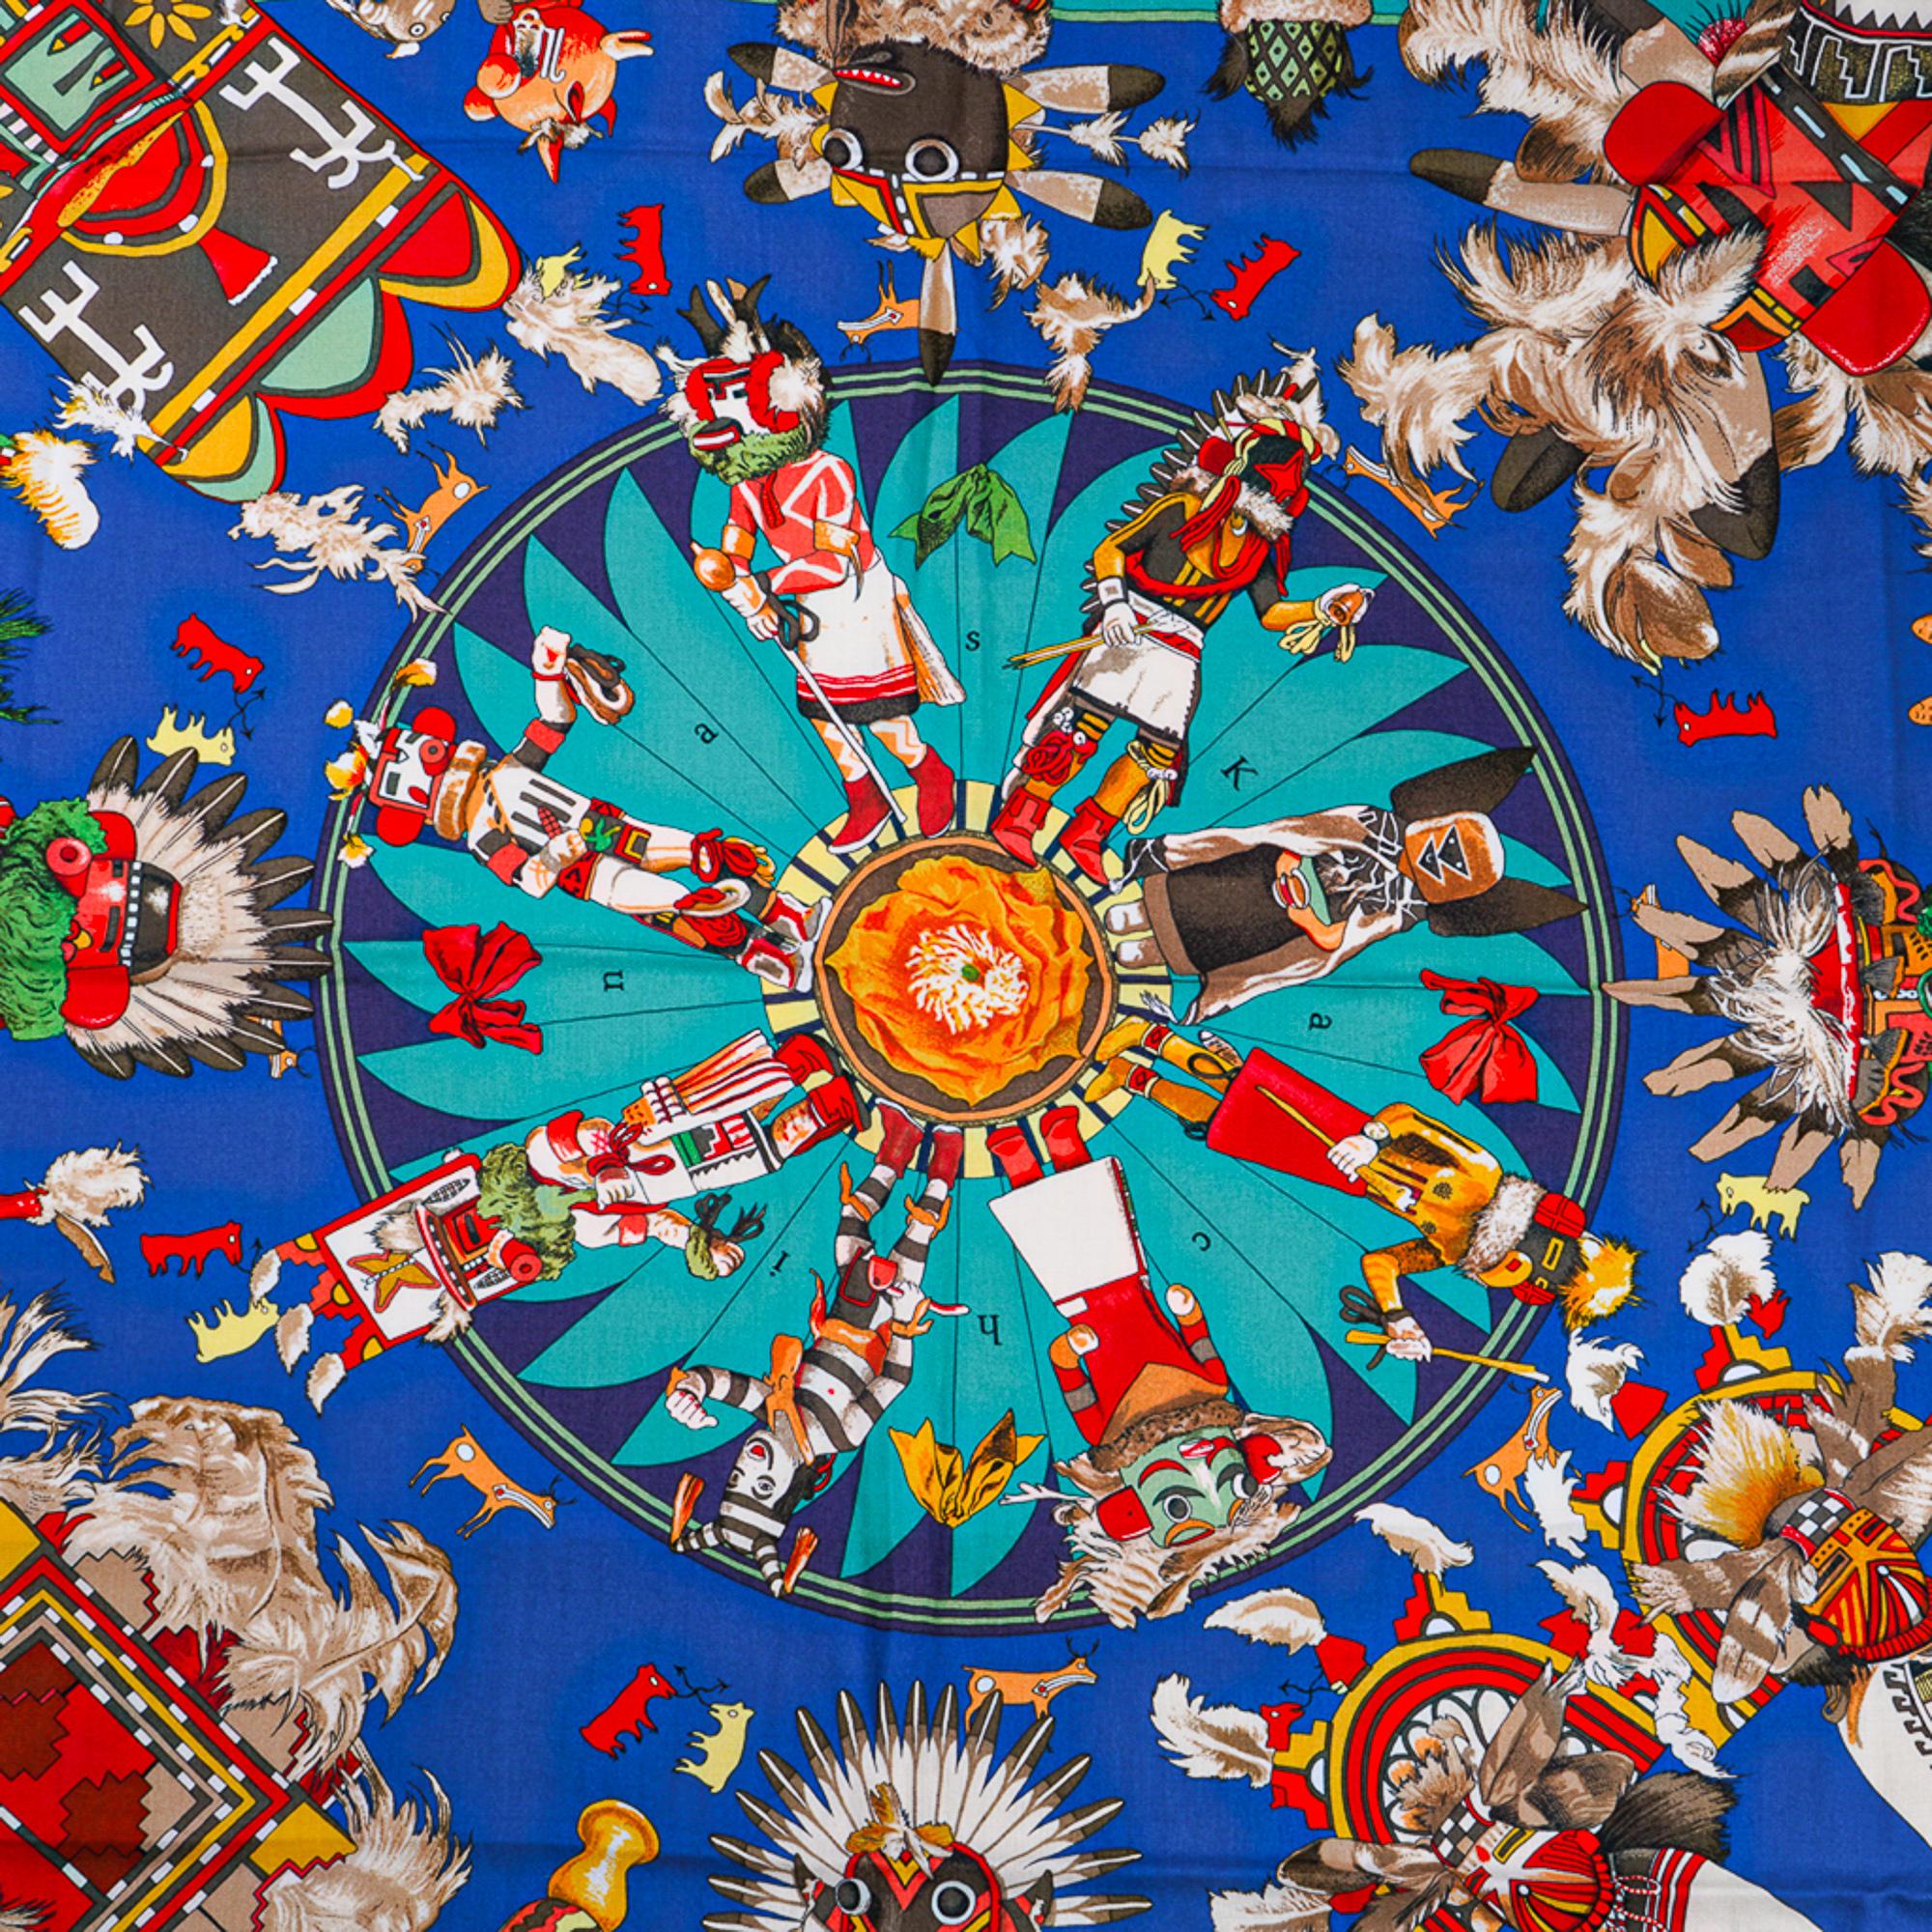 Mightychic offers a  guaranteed authentic Hermes Kachinas Cashmere and Silk scarf by Kermit Oliver.
Royal Blue, Red, Orange, Yellow, White colorway.
Depicts ritual dolls given to Hopi children.
With their peace loving nature, they are on good terms